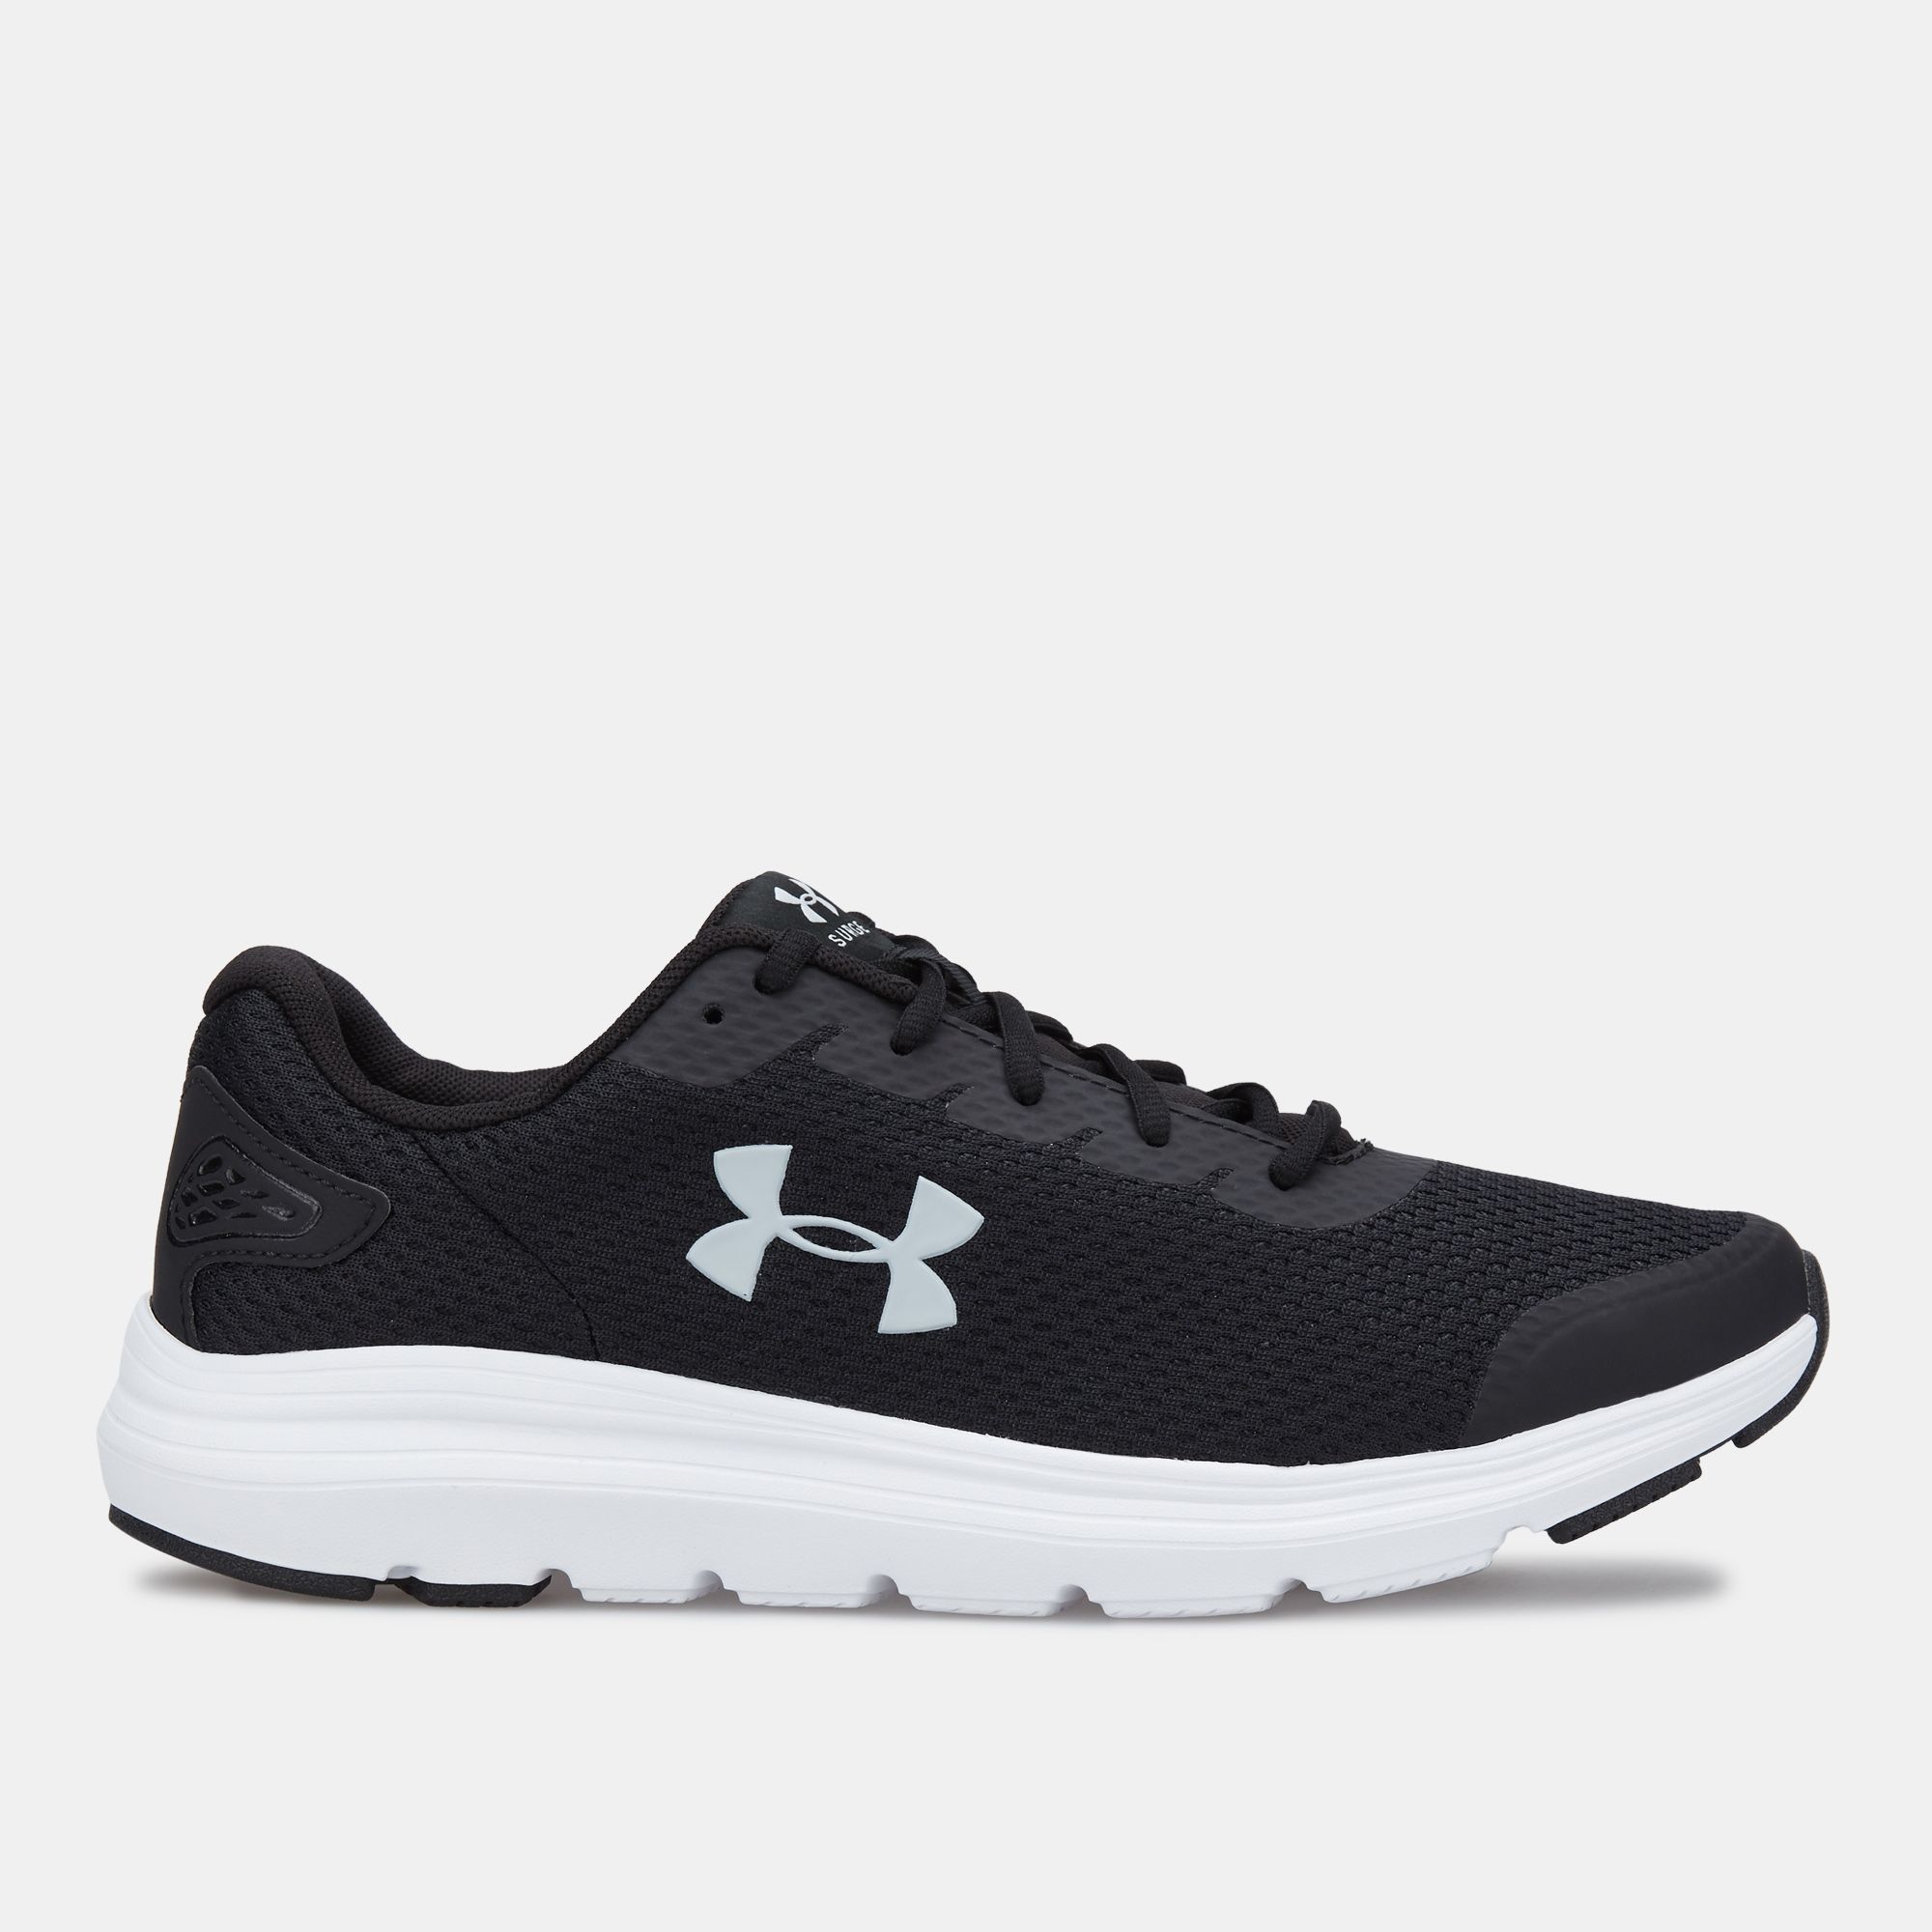 under armour surge men's running shoes